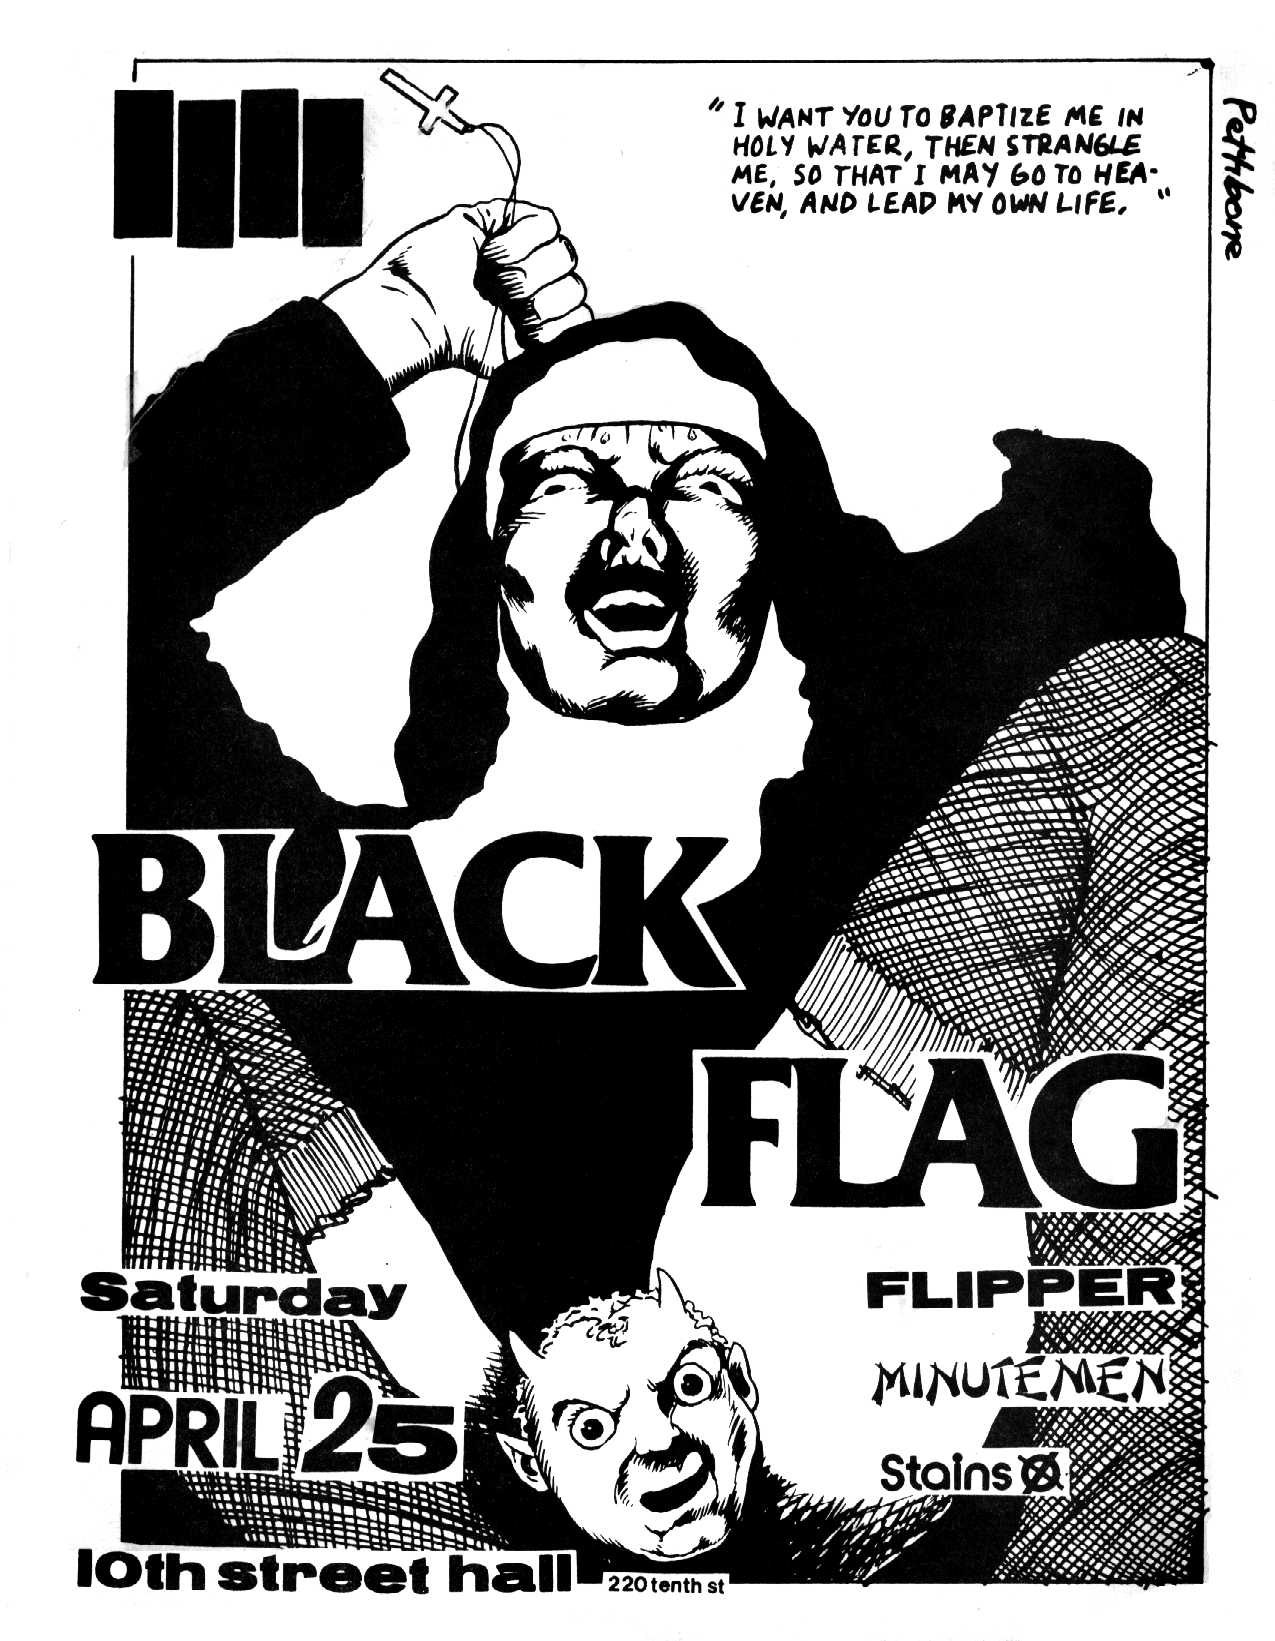  Poster for Black Flag, Flipper, and the Minutemen at 10th Street Hall